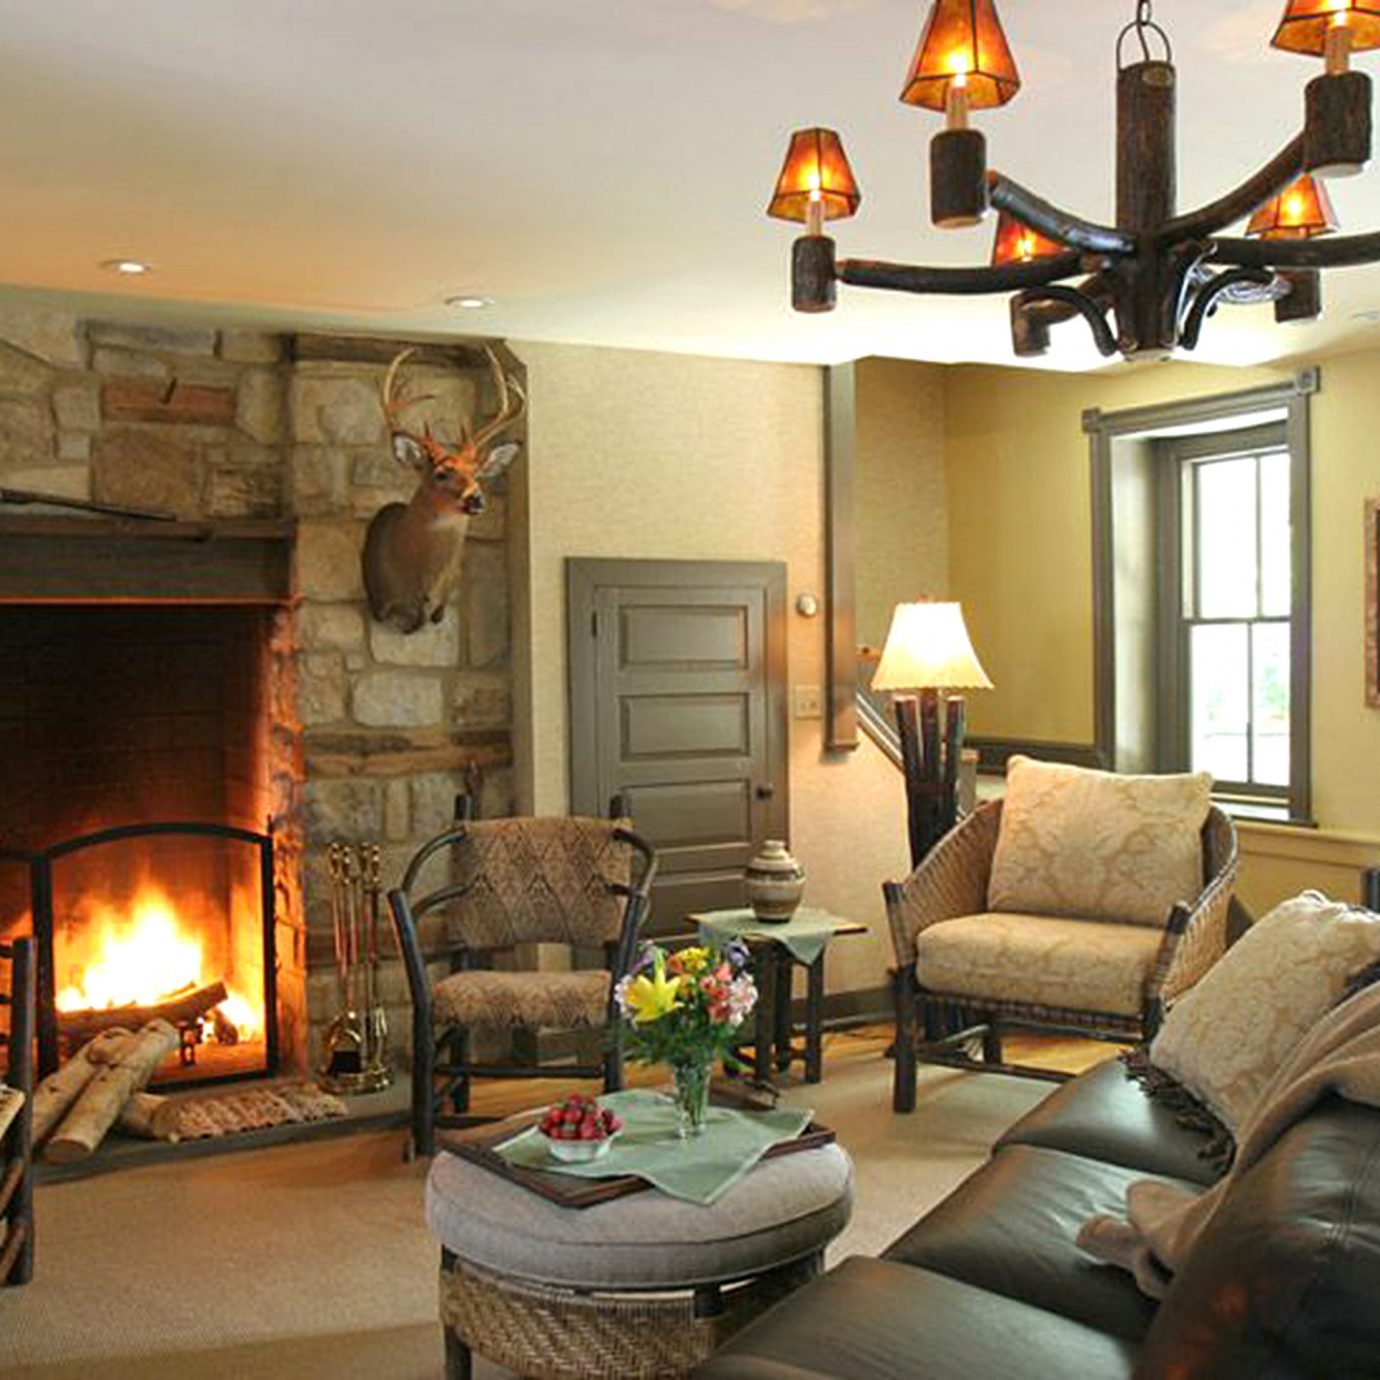 B&B Country Fireplace Historic Lounge living room property home cottage farmhouse hearth leather